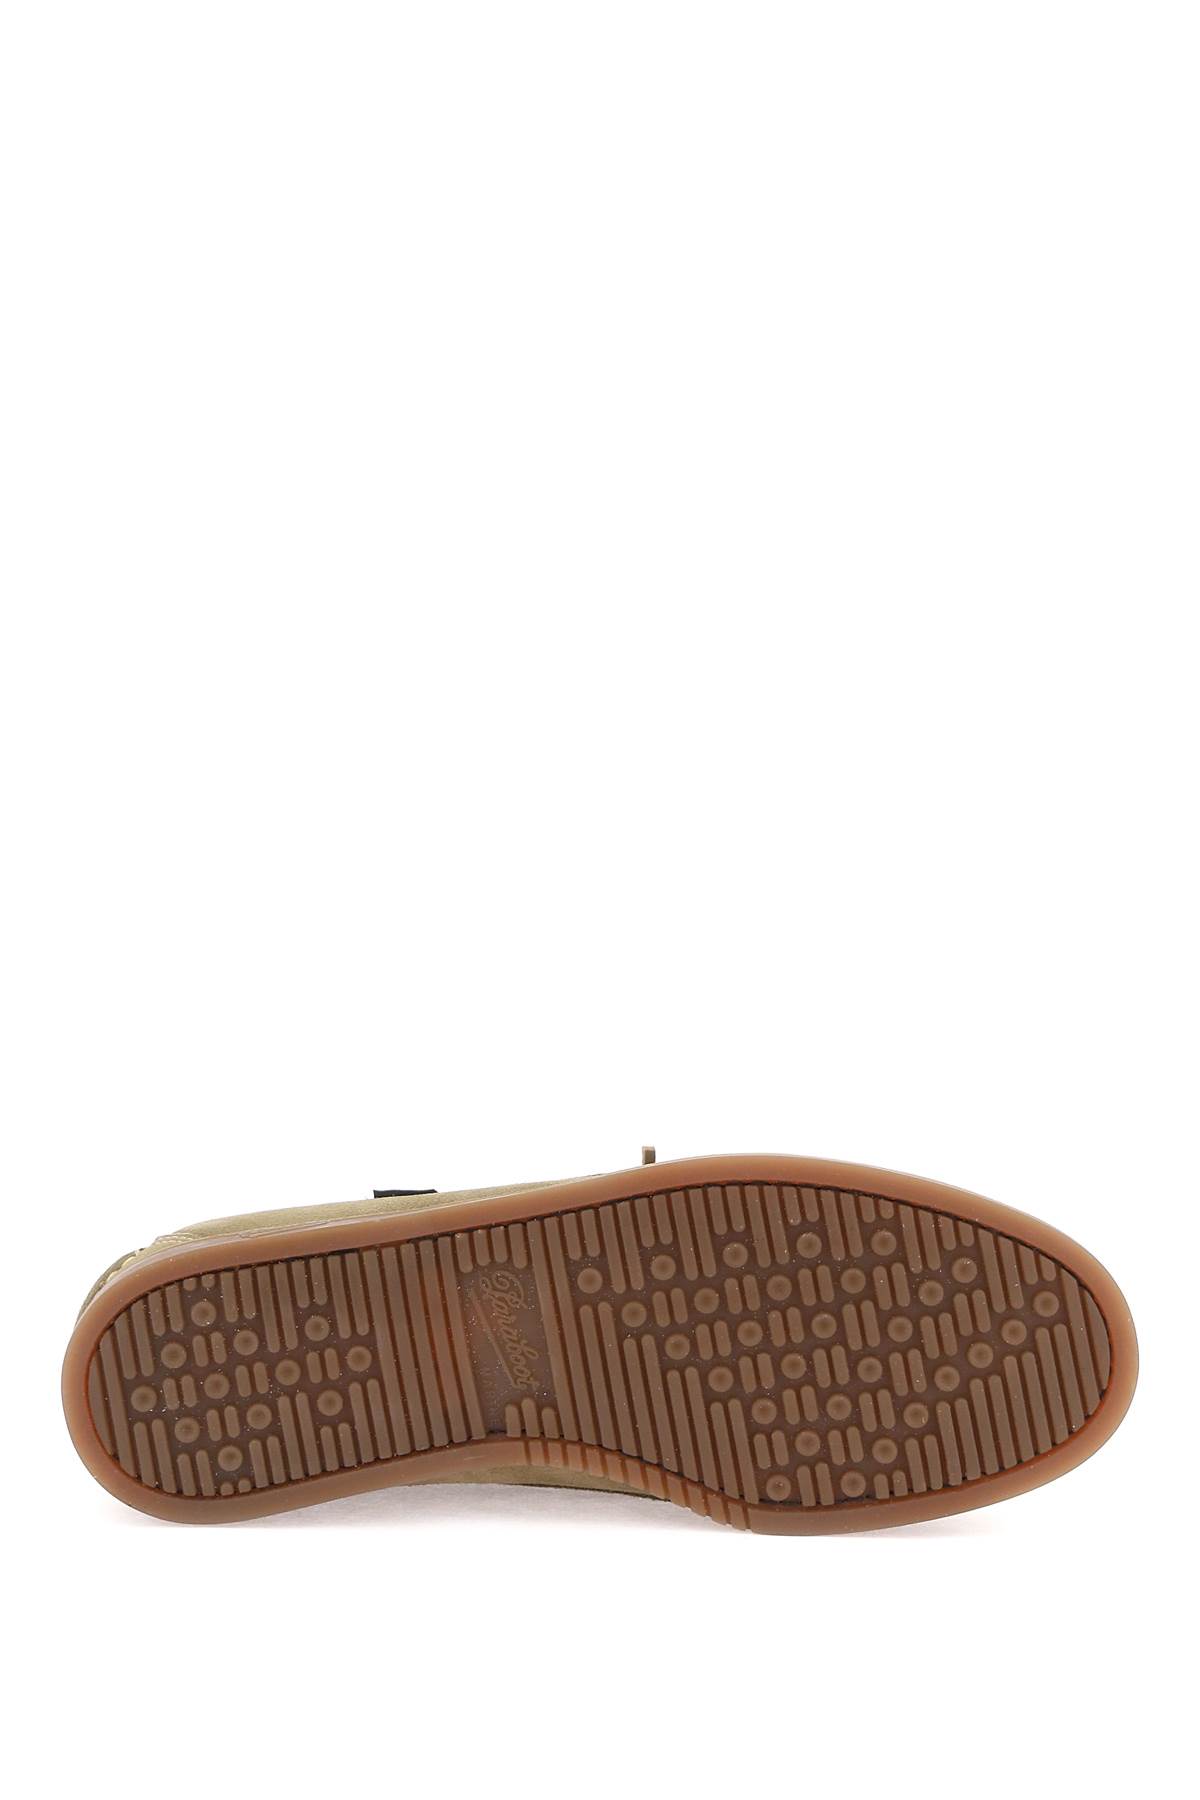 Shop Paraboot Barth Loafers In Miel Vel Sand (beige)